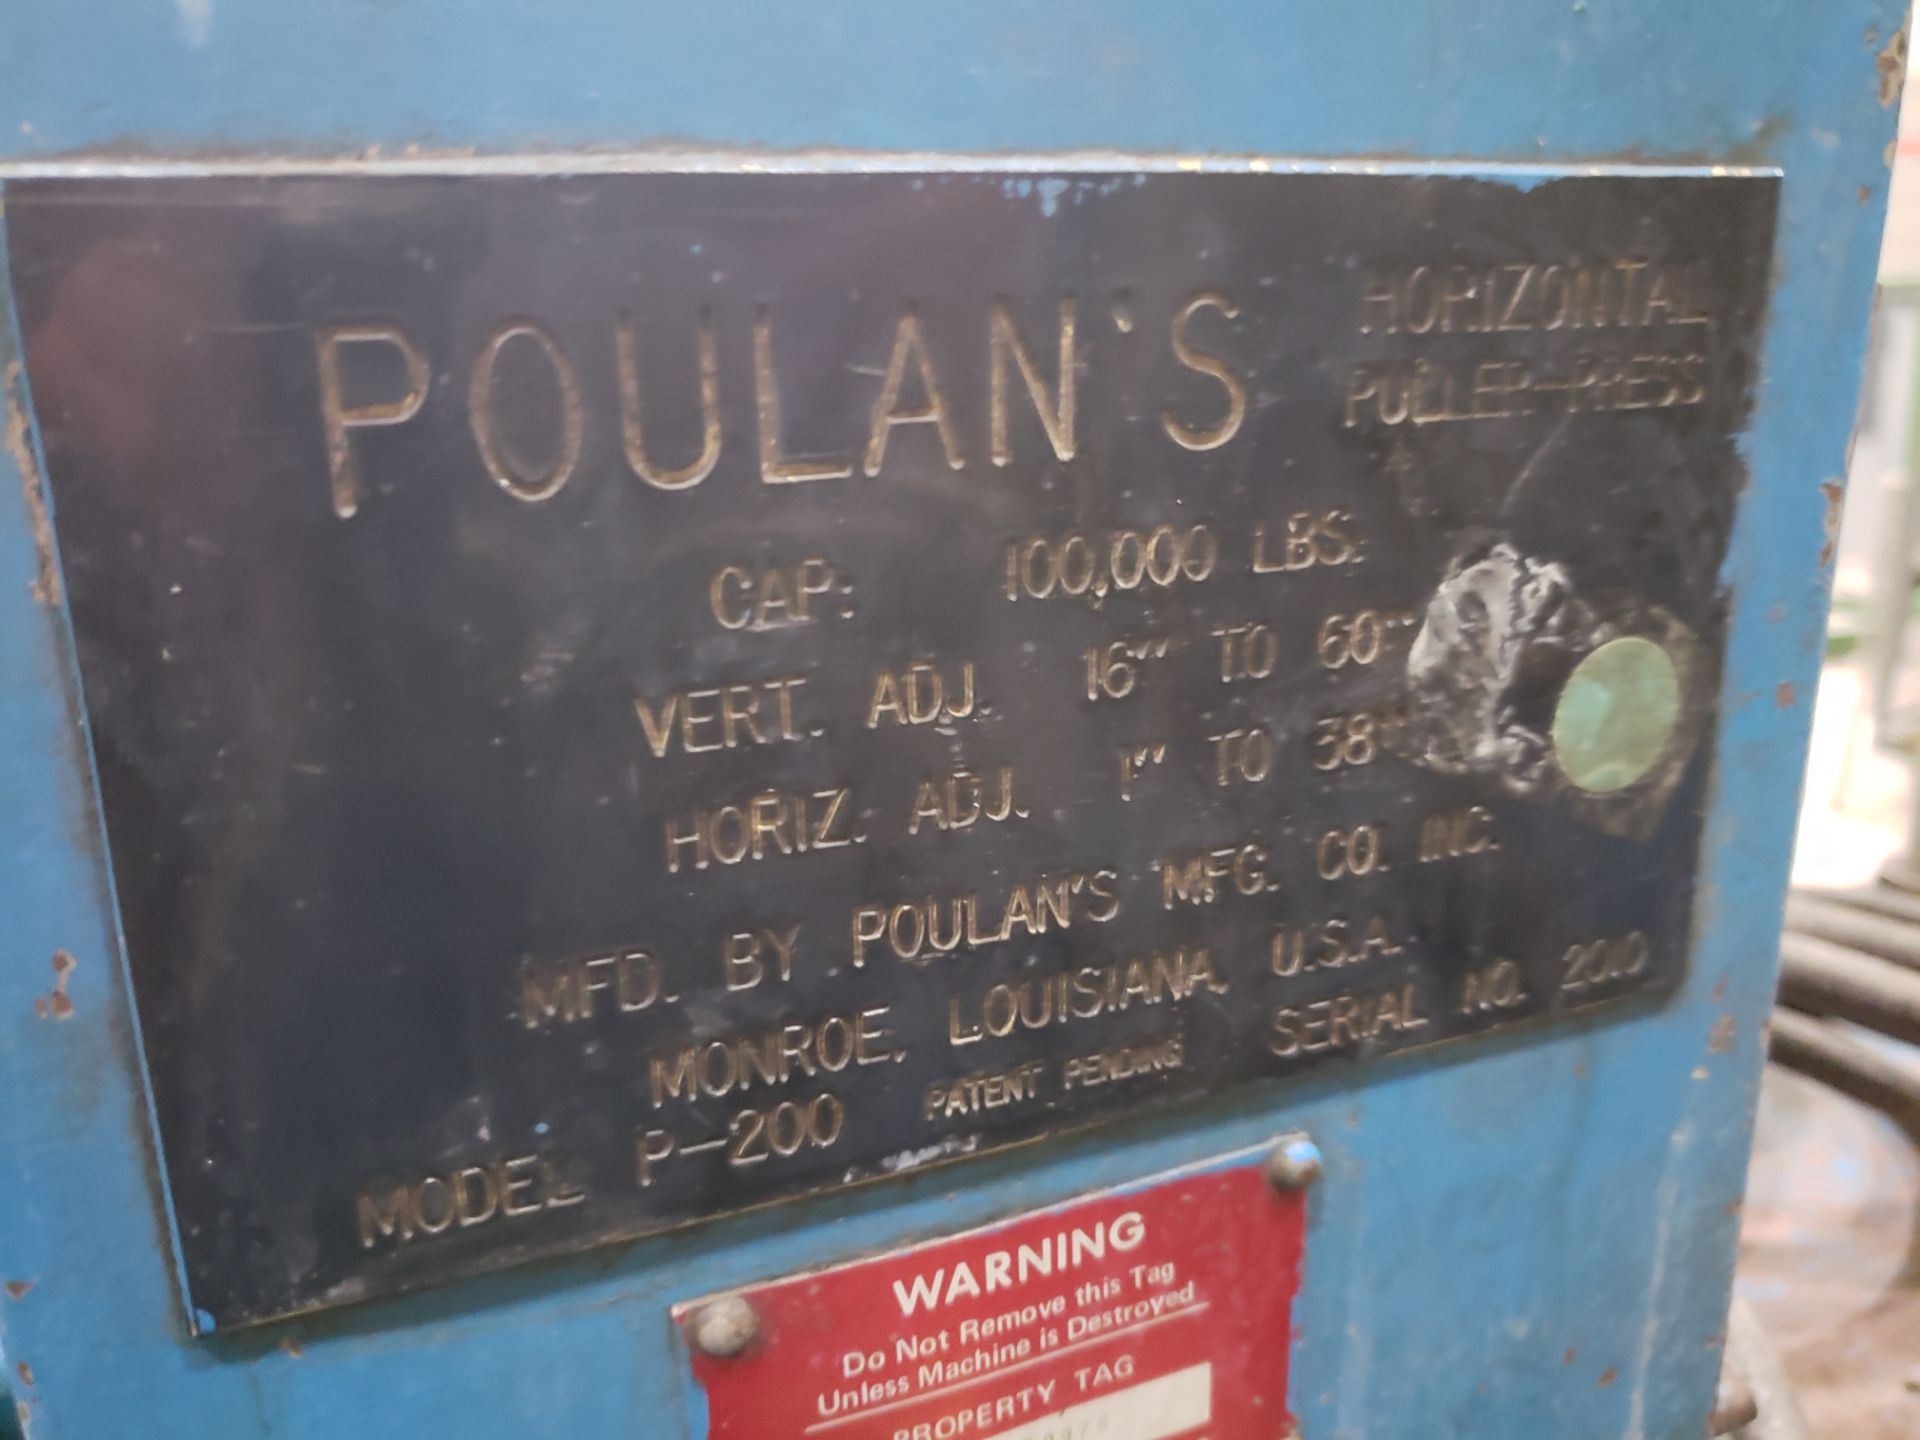 POULANS HYDRAULIC HORZ PULLER PRESS MODEL-P-200 S#2010 B-1 - Image 2 of 3